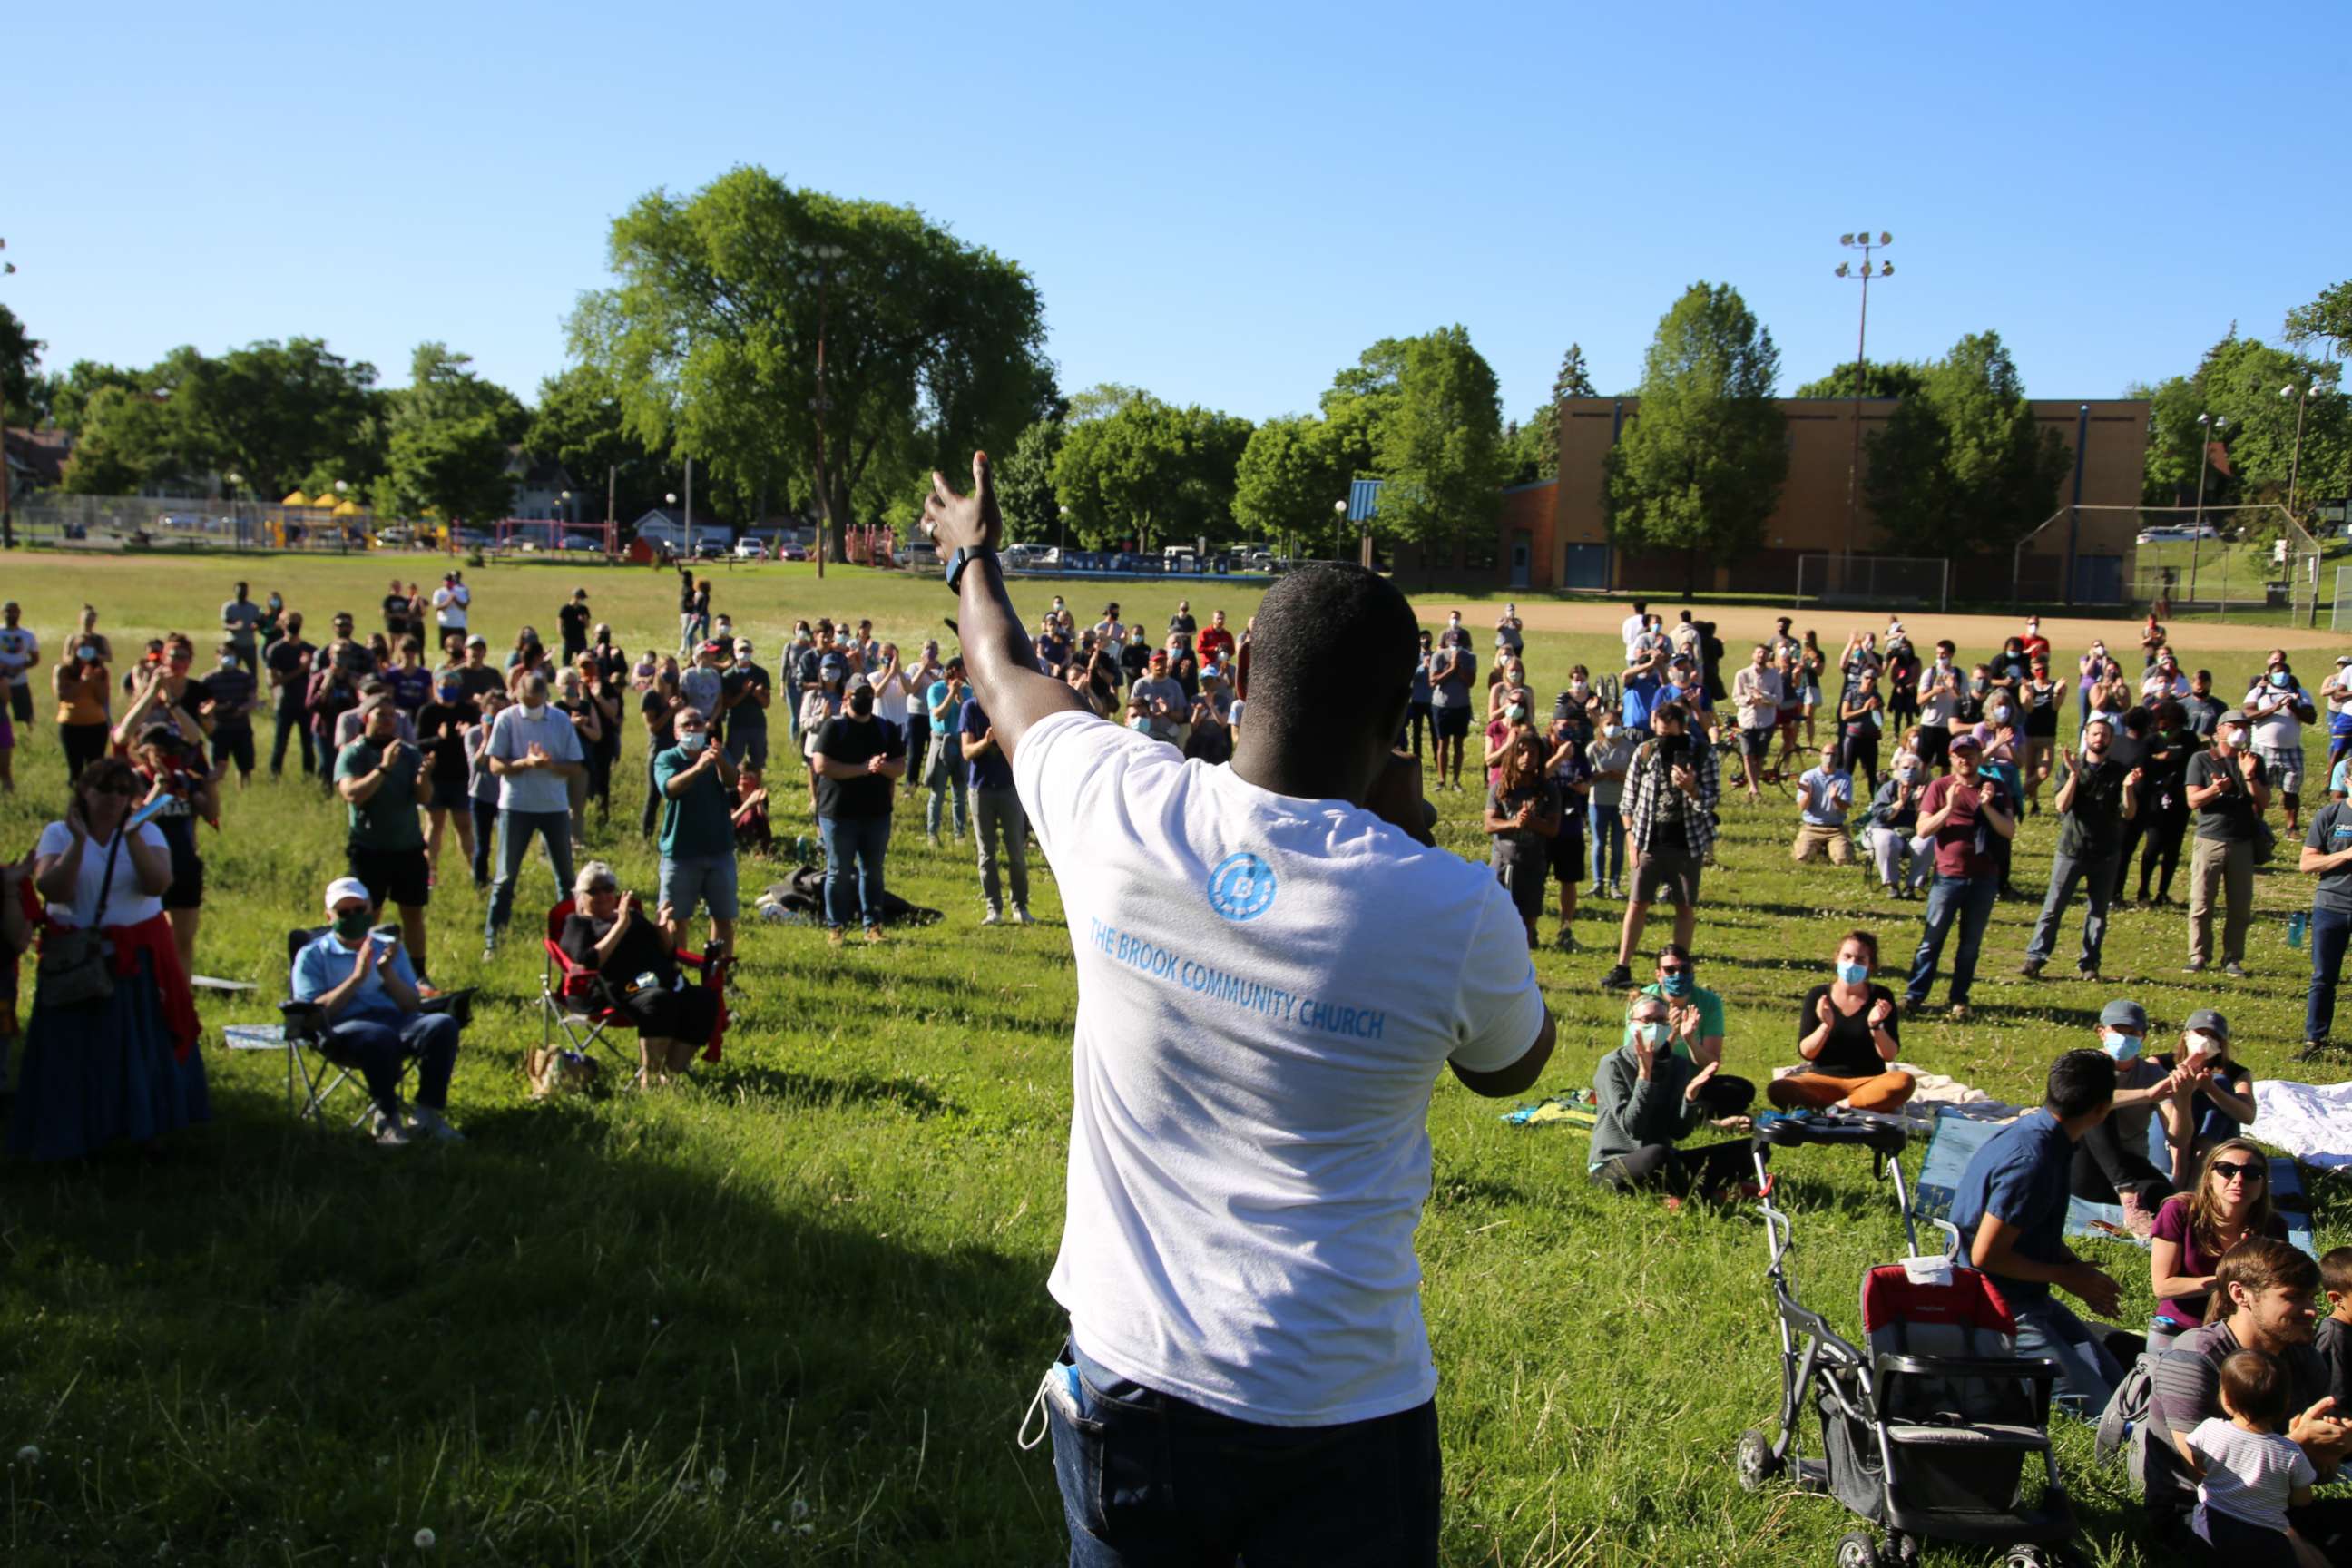 PHOTO: Pastor W. Seth Martin speaks at a prayer unity event in Phelps Park in Minneapolis, Minn. on May 30, 2020.